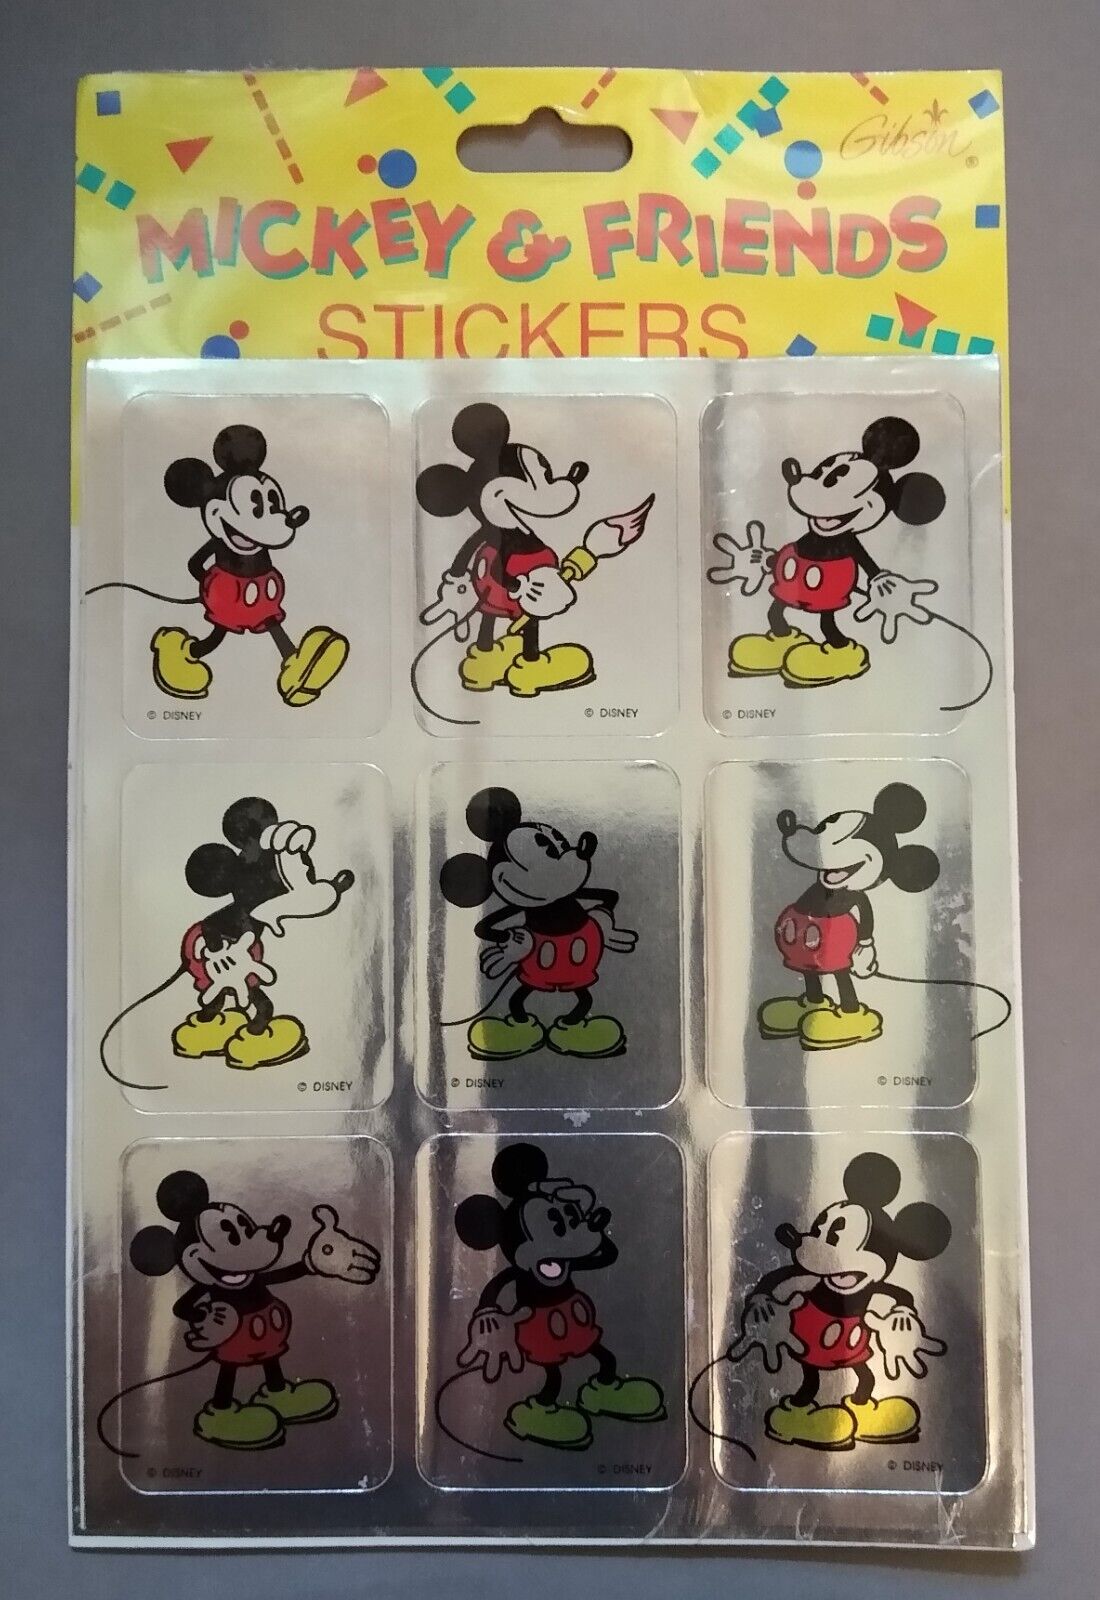 Vintage Mickey & Friends Stickers, 18 Pcs, All Mickey Mouse, 1993, Metallic